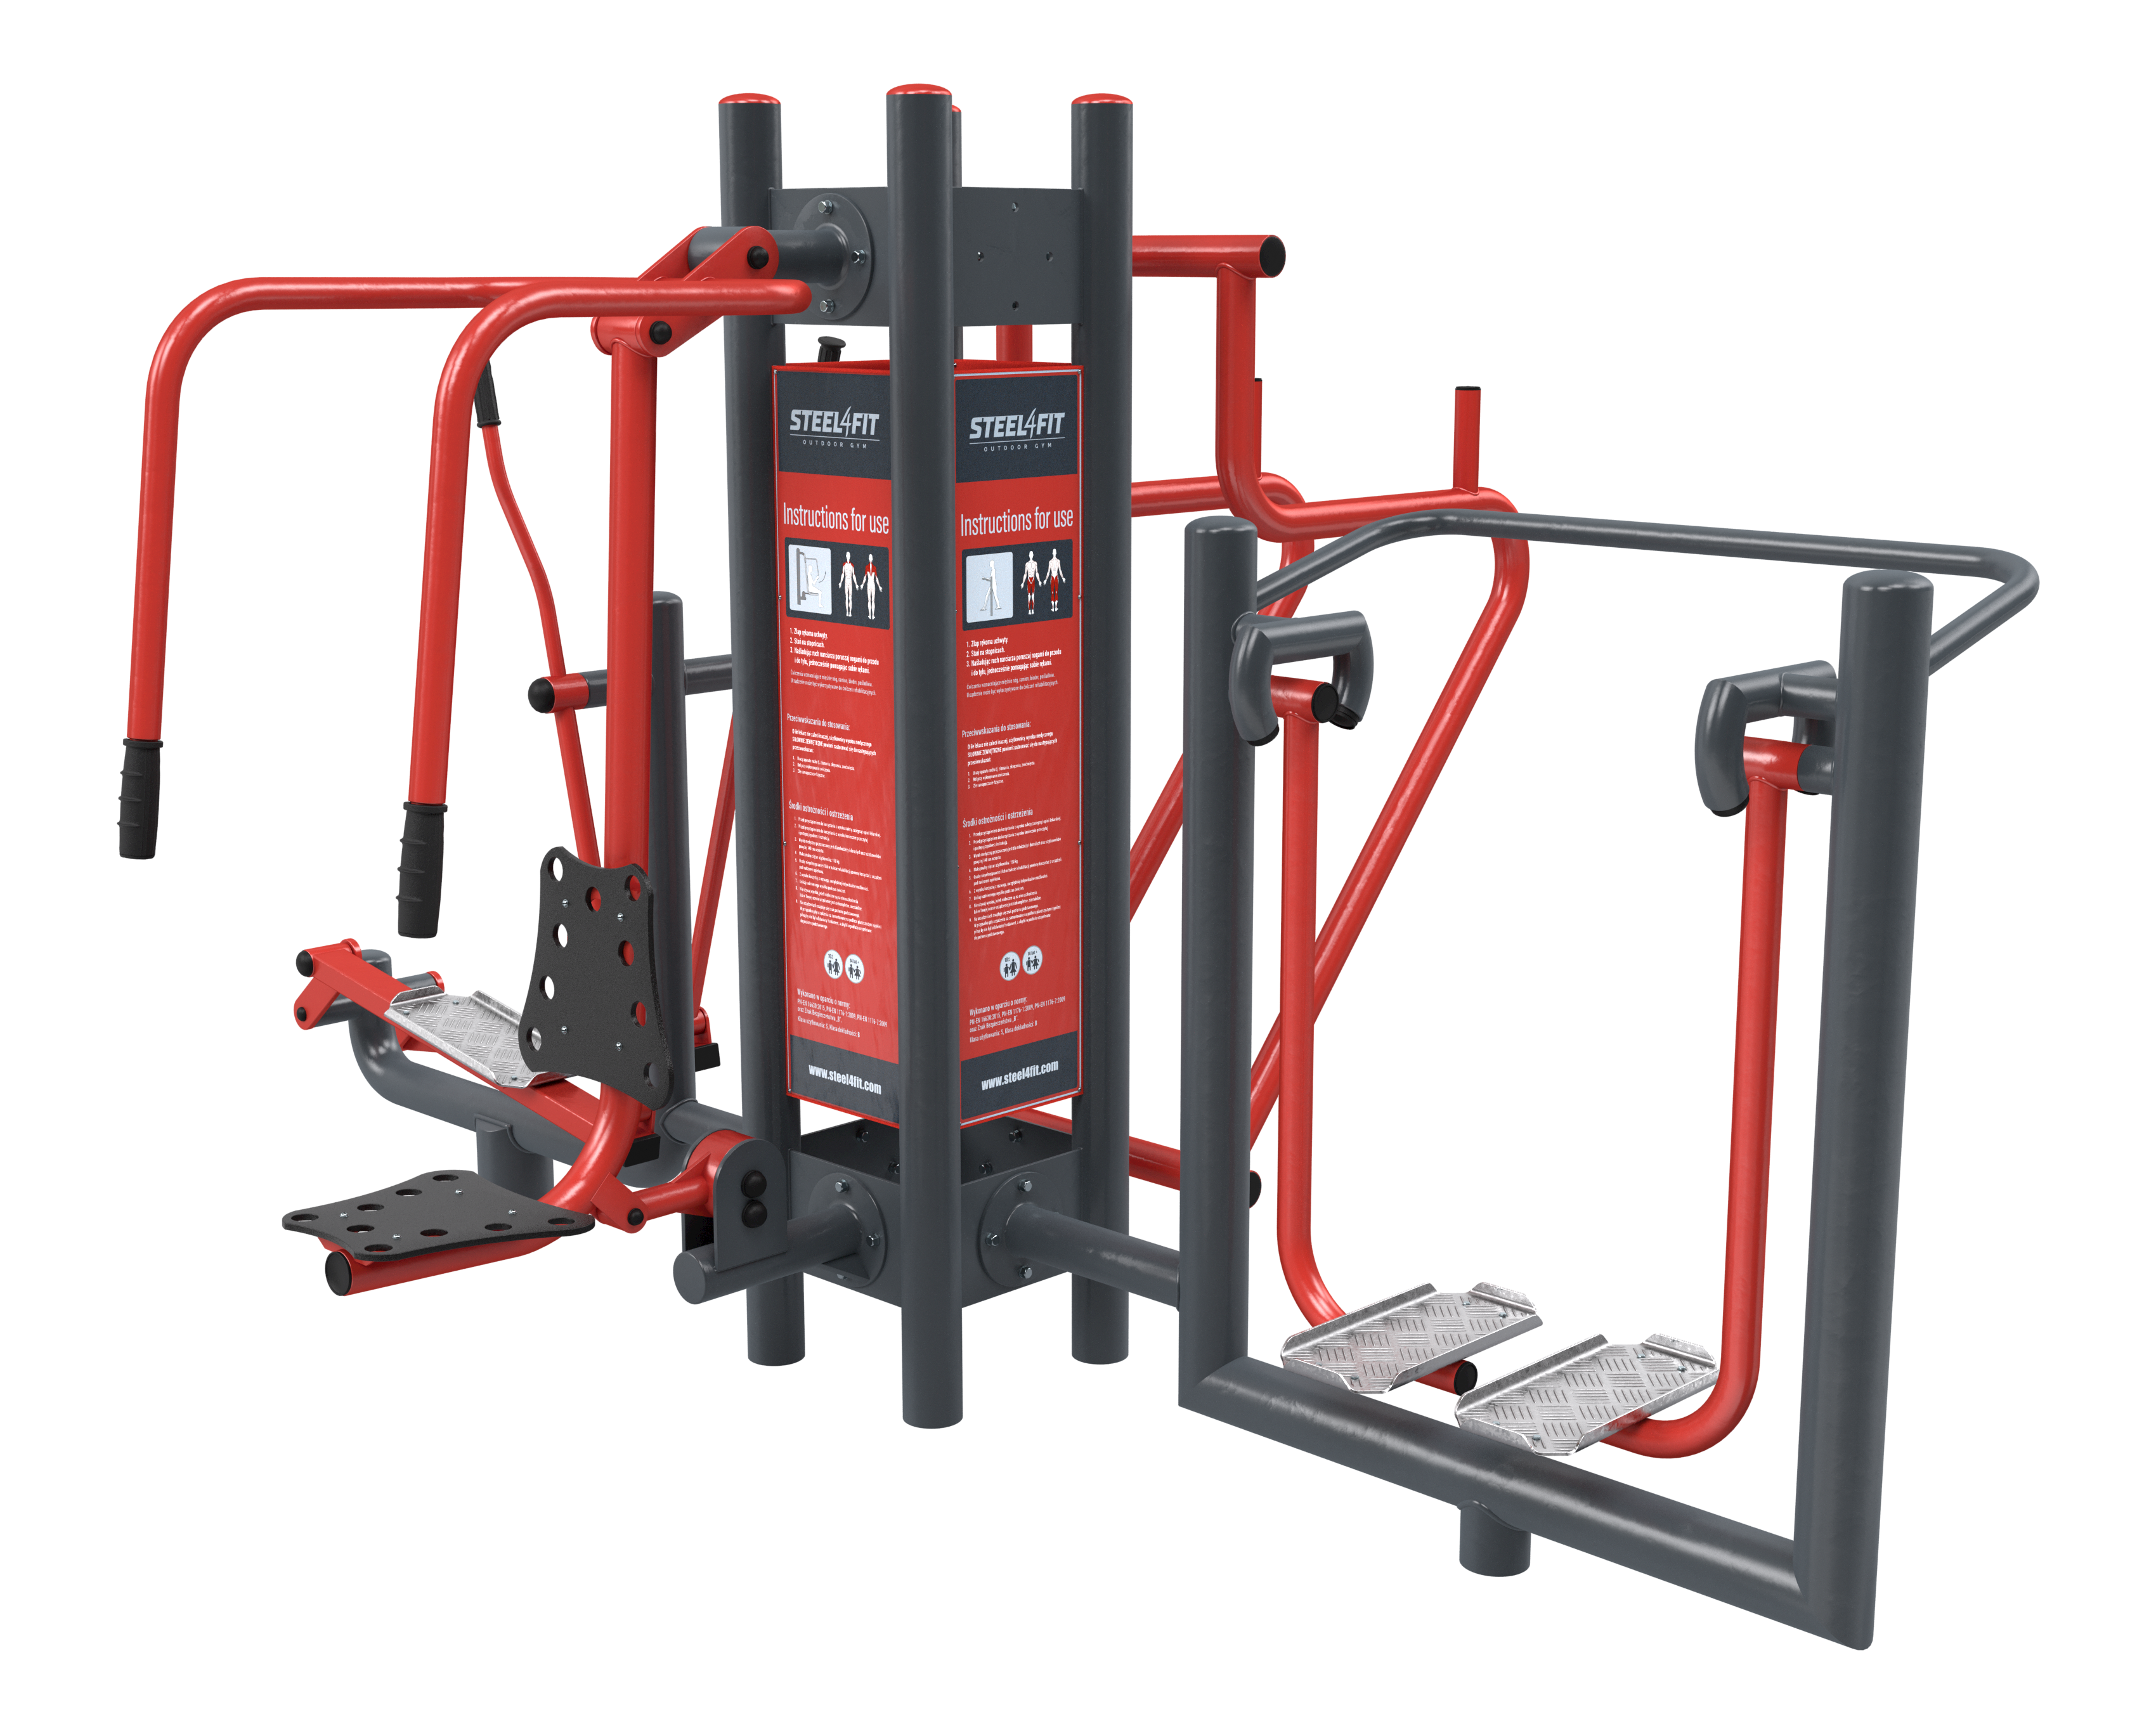 Outdoor fitness equipment - Four outdoor gym stations